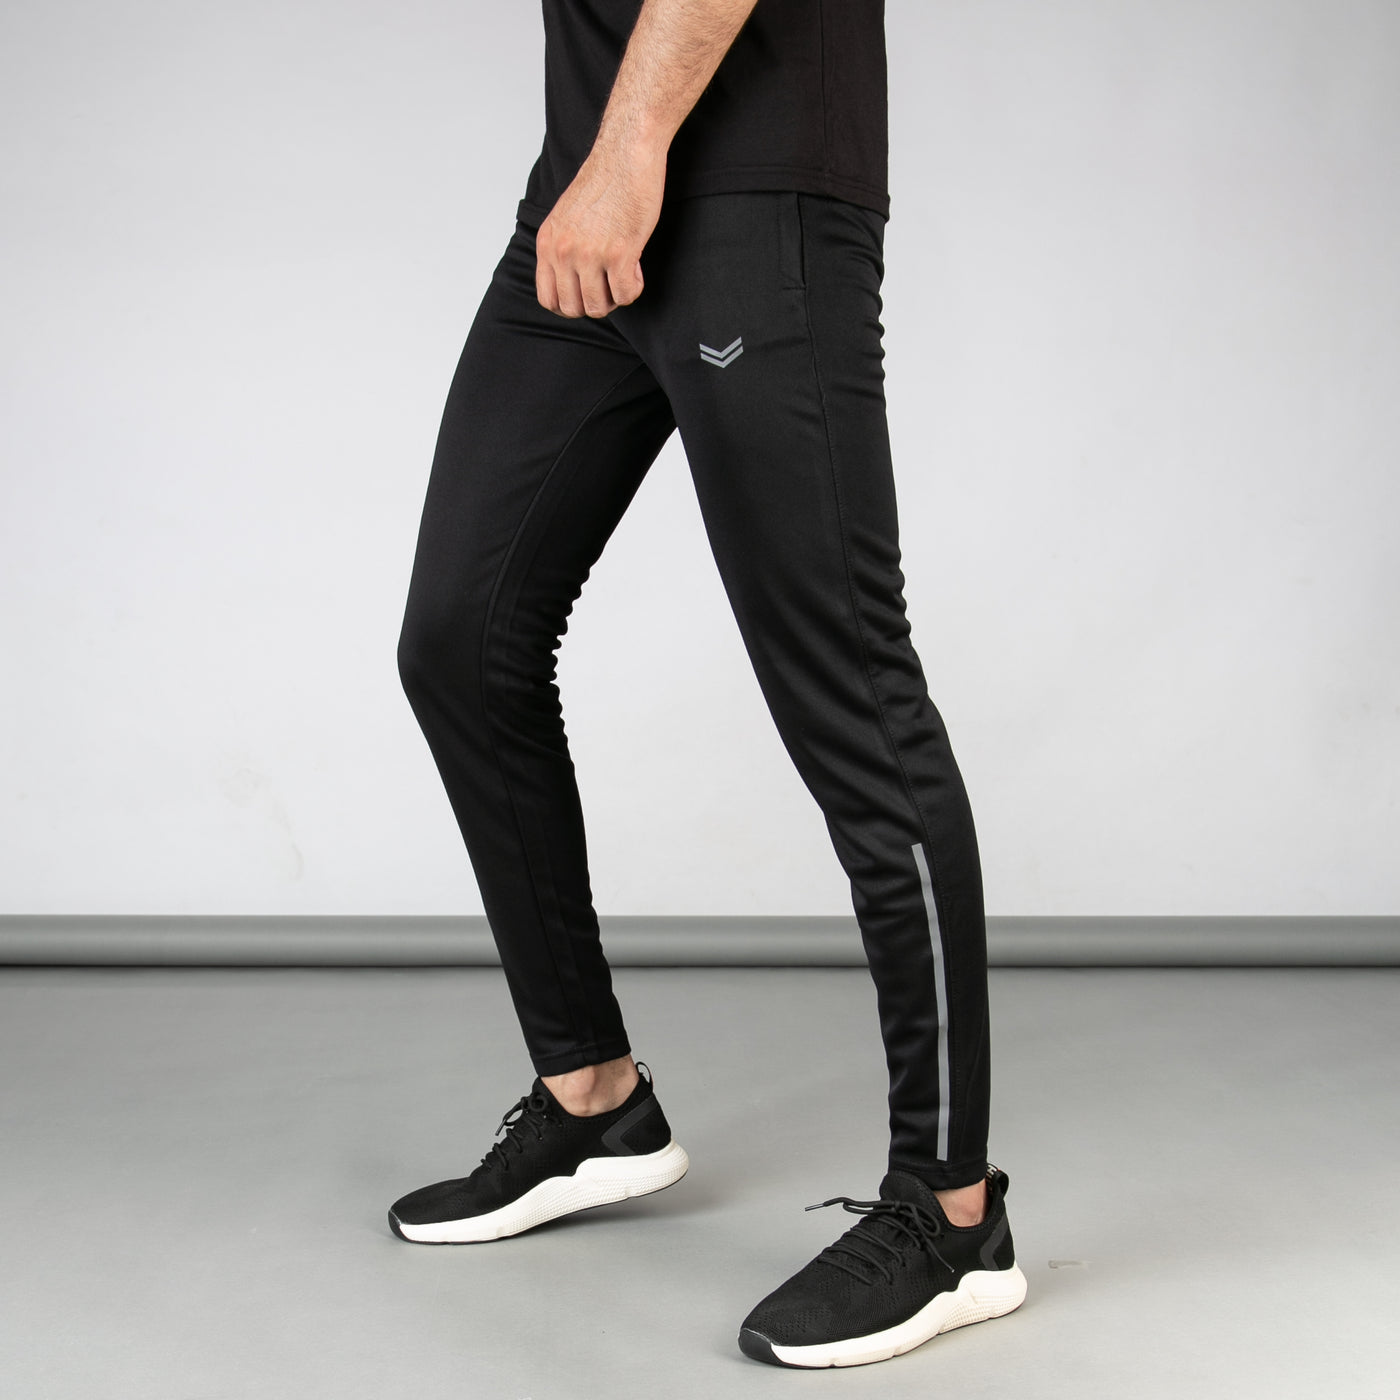 Black Quick Dry Bottoms with Thin Reflective Stripes